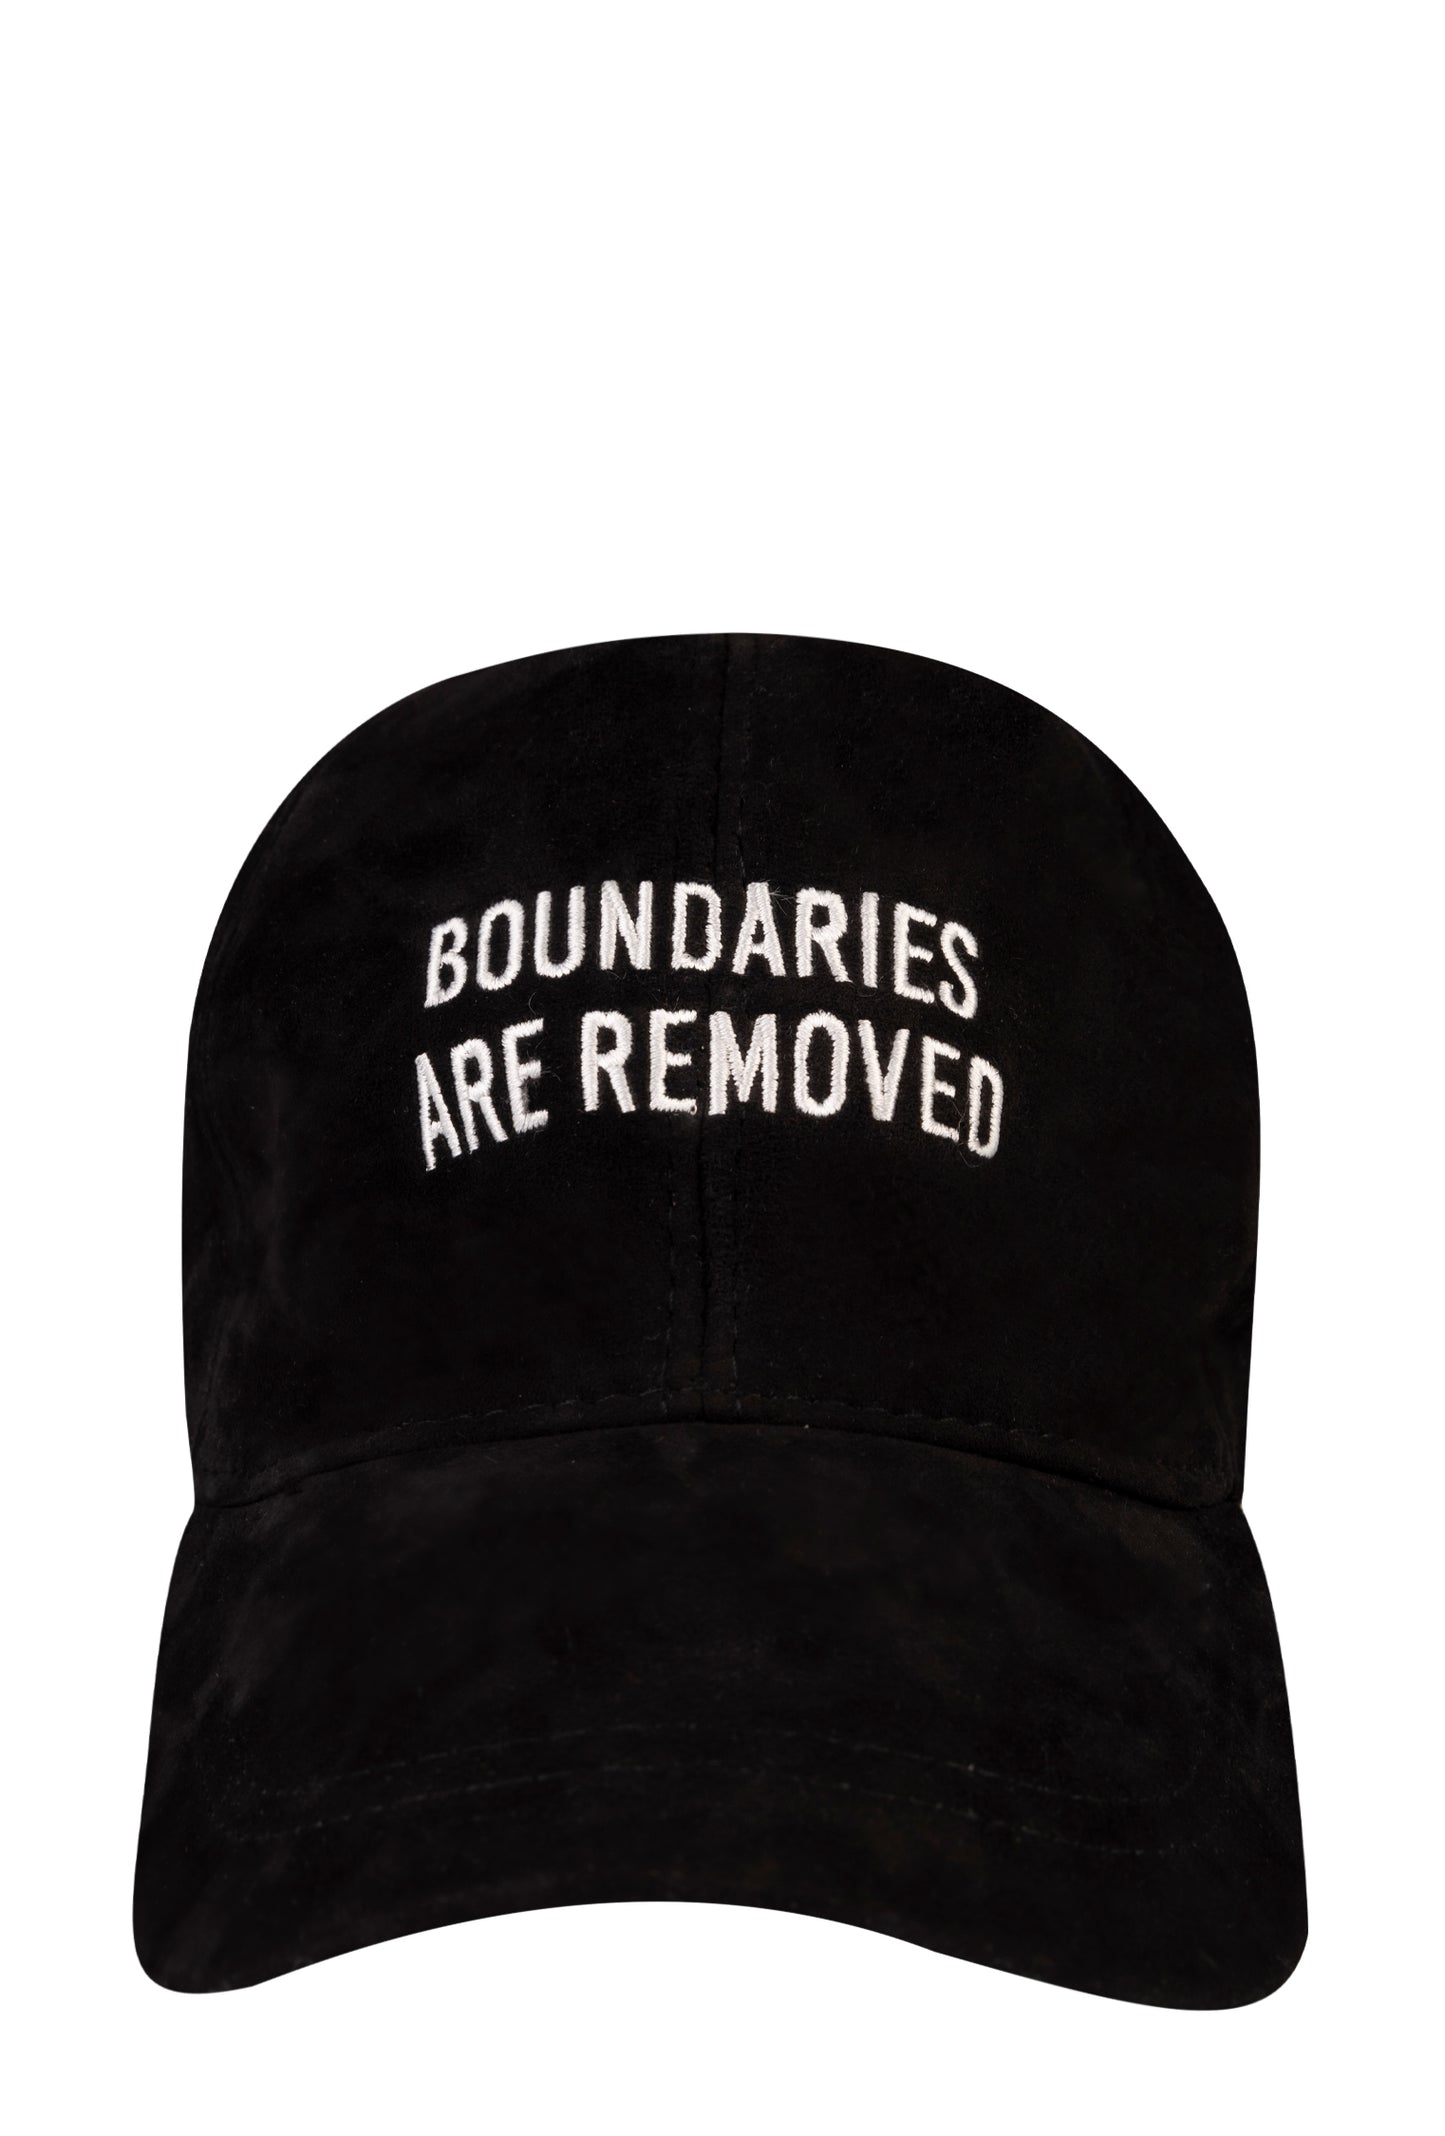 Boundaries Are Removed